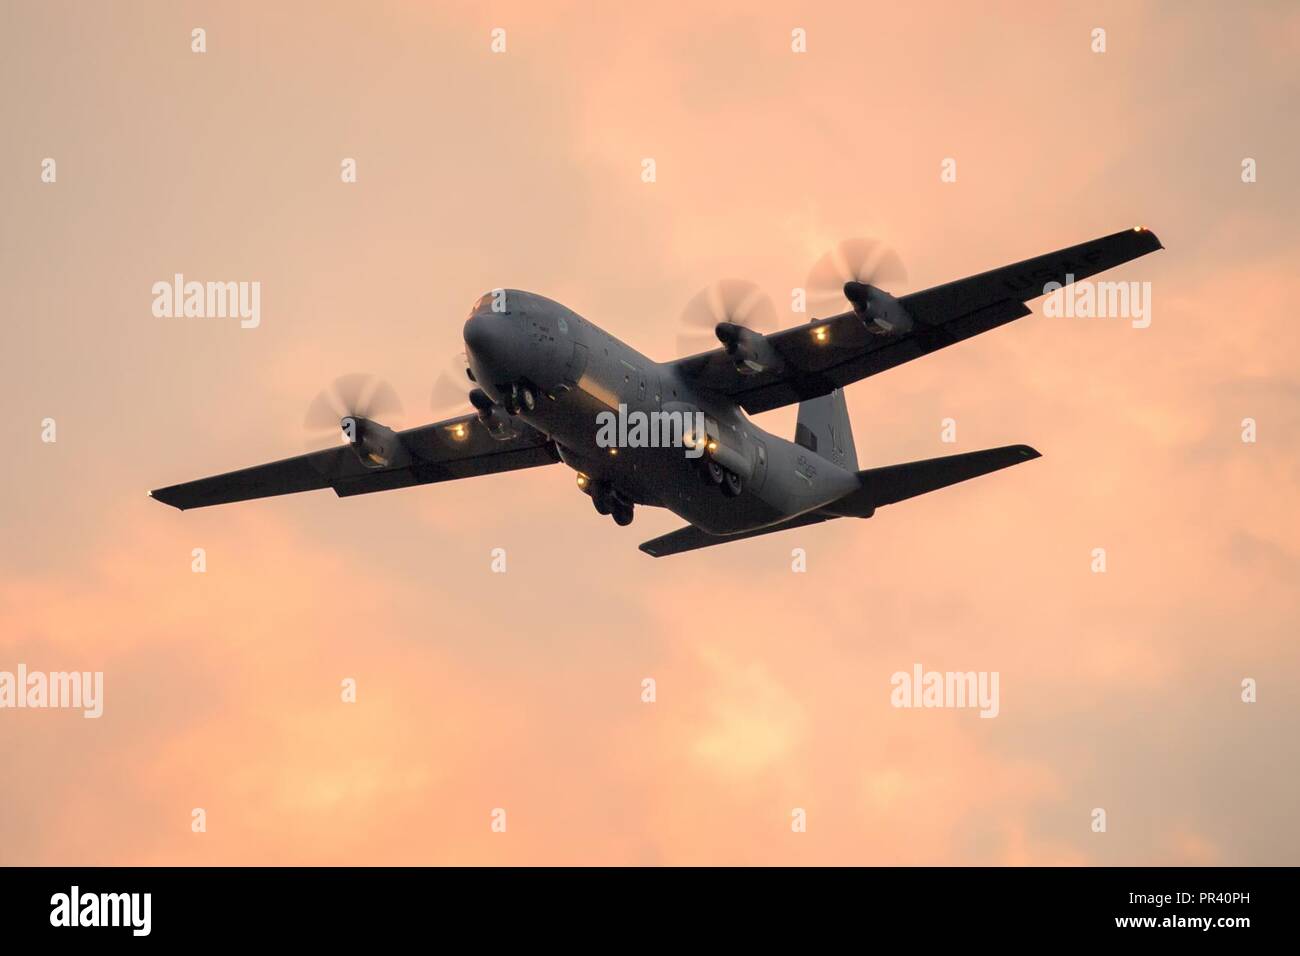 A U.S. Air Force C-130J Super Hercules from the 36th Airlift Squadron maneuvers during a training mission over Yokota Air Base, Japan, July 31, 2017. The C-130 provides tactical airlift worldwide and its flexible design allows it to operate in austere environments. Stock Photo